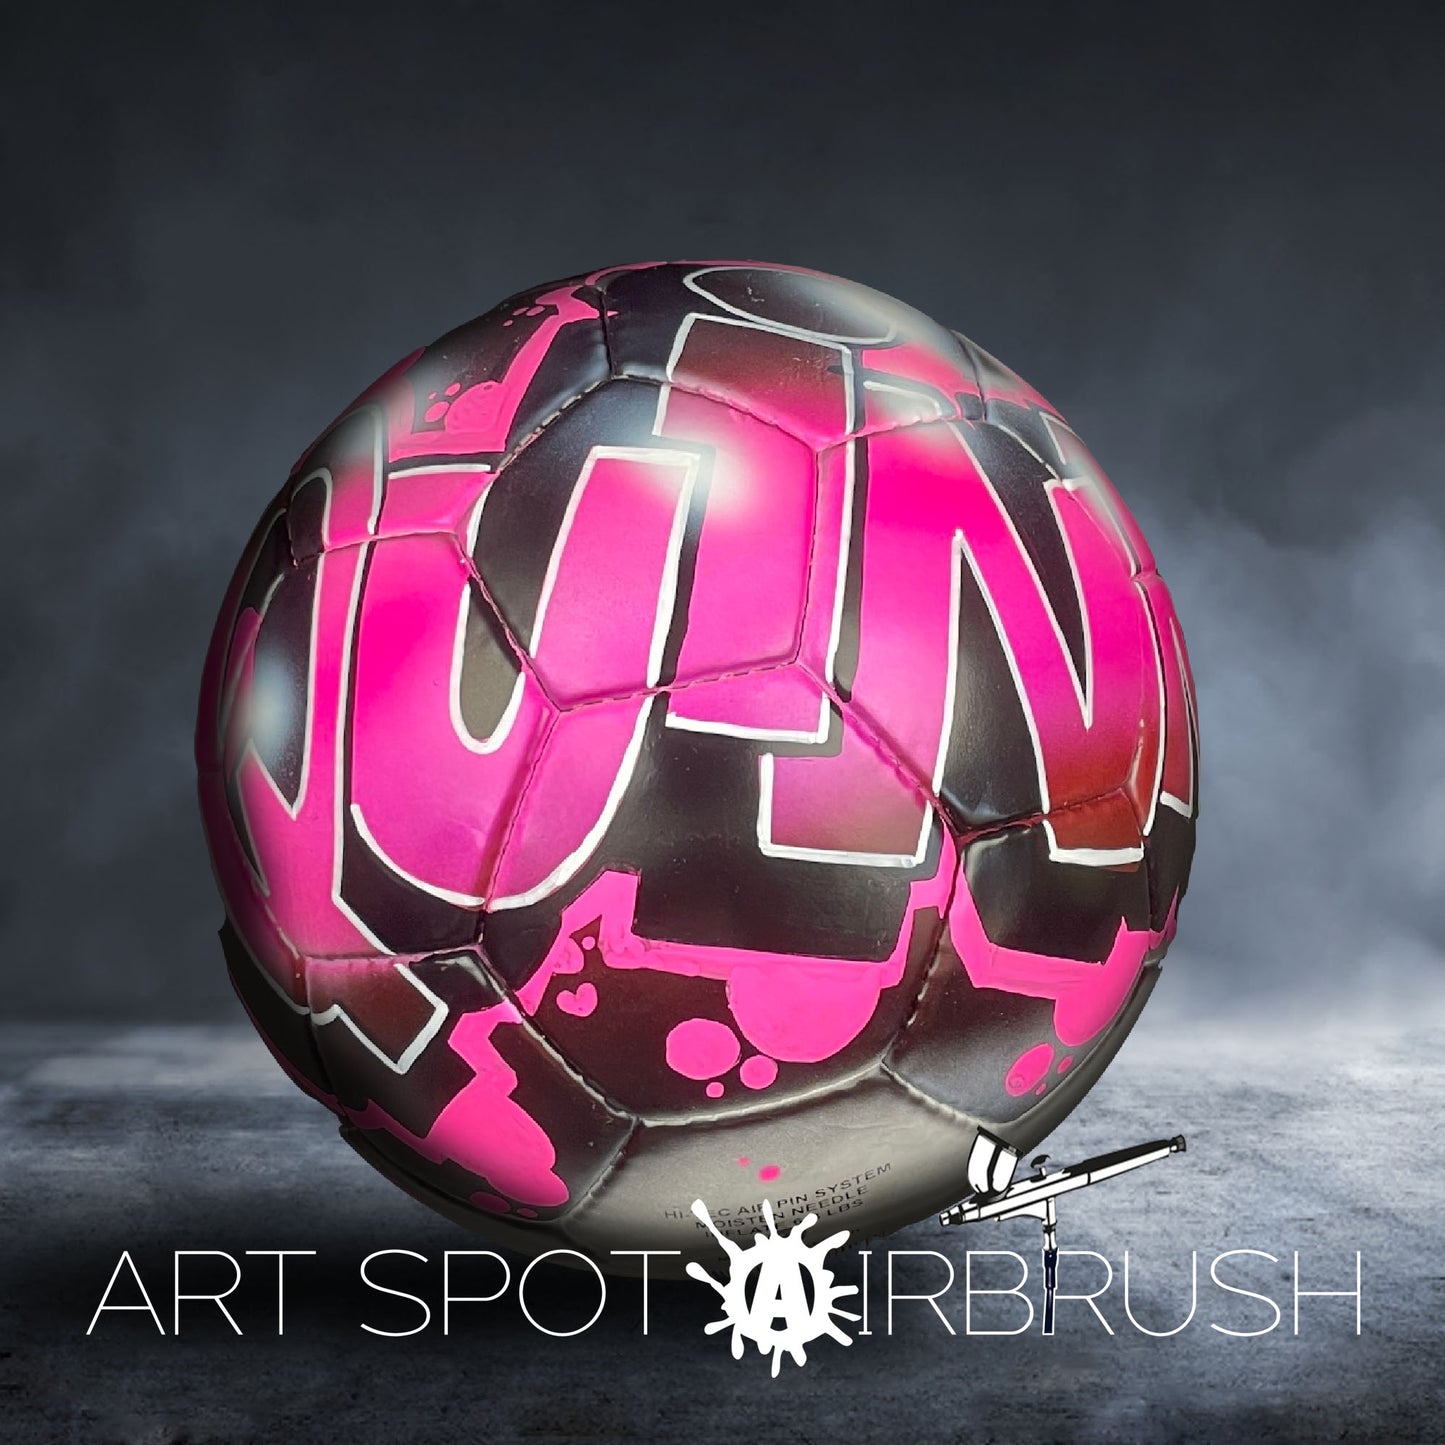 Personalized Soccer Ball with Airbrush Graffiti Name